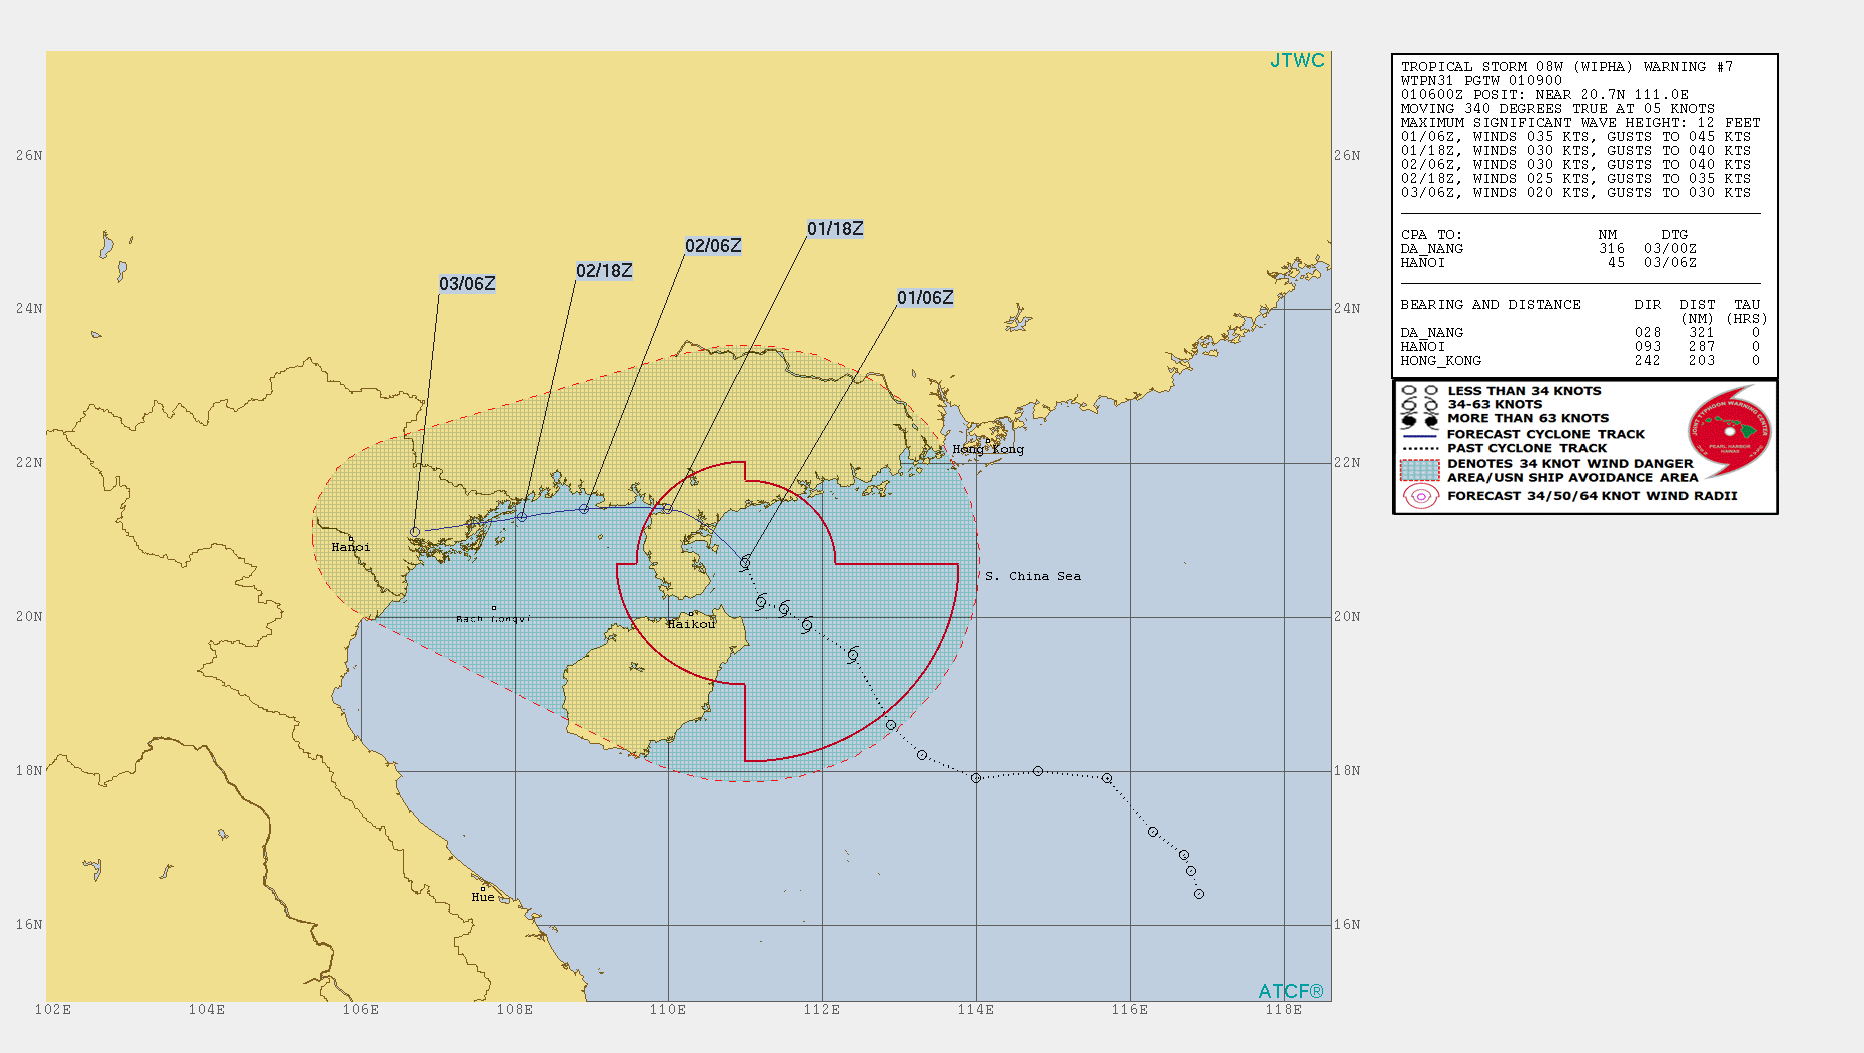 WARNING 7/JTWC. INTENSITY SET AT 35KNOTS AND UNLIKELY TO INCREASE SIGNIFICANTLY